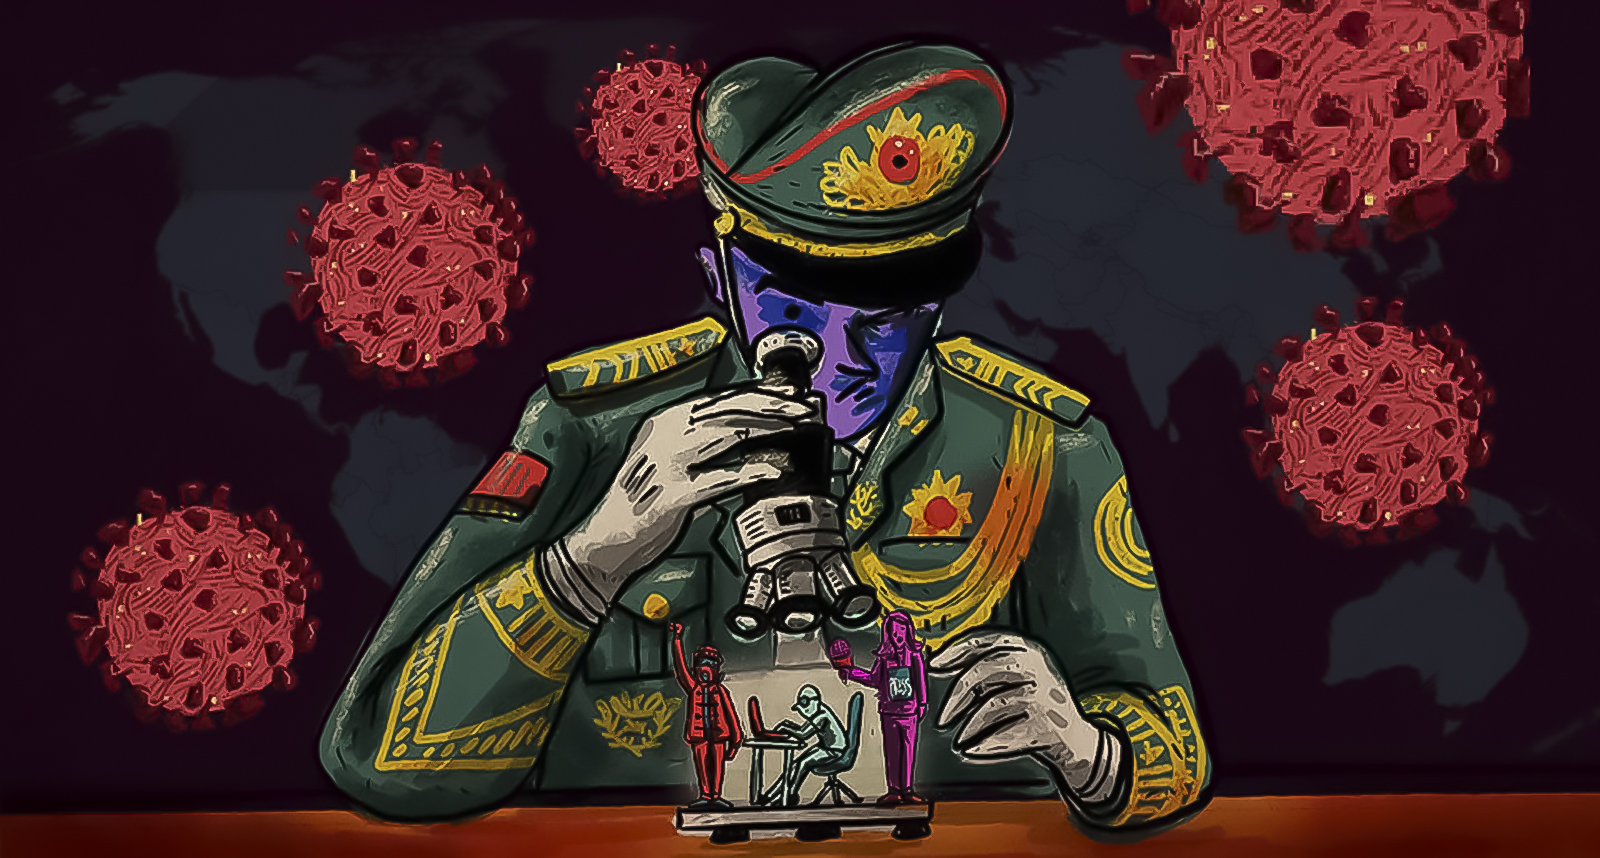 An illustration shows a man in a uniform looking through a microscope at a group of activists.